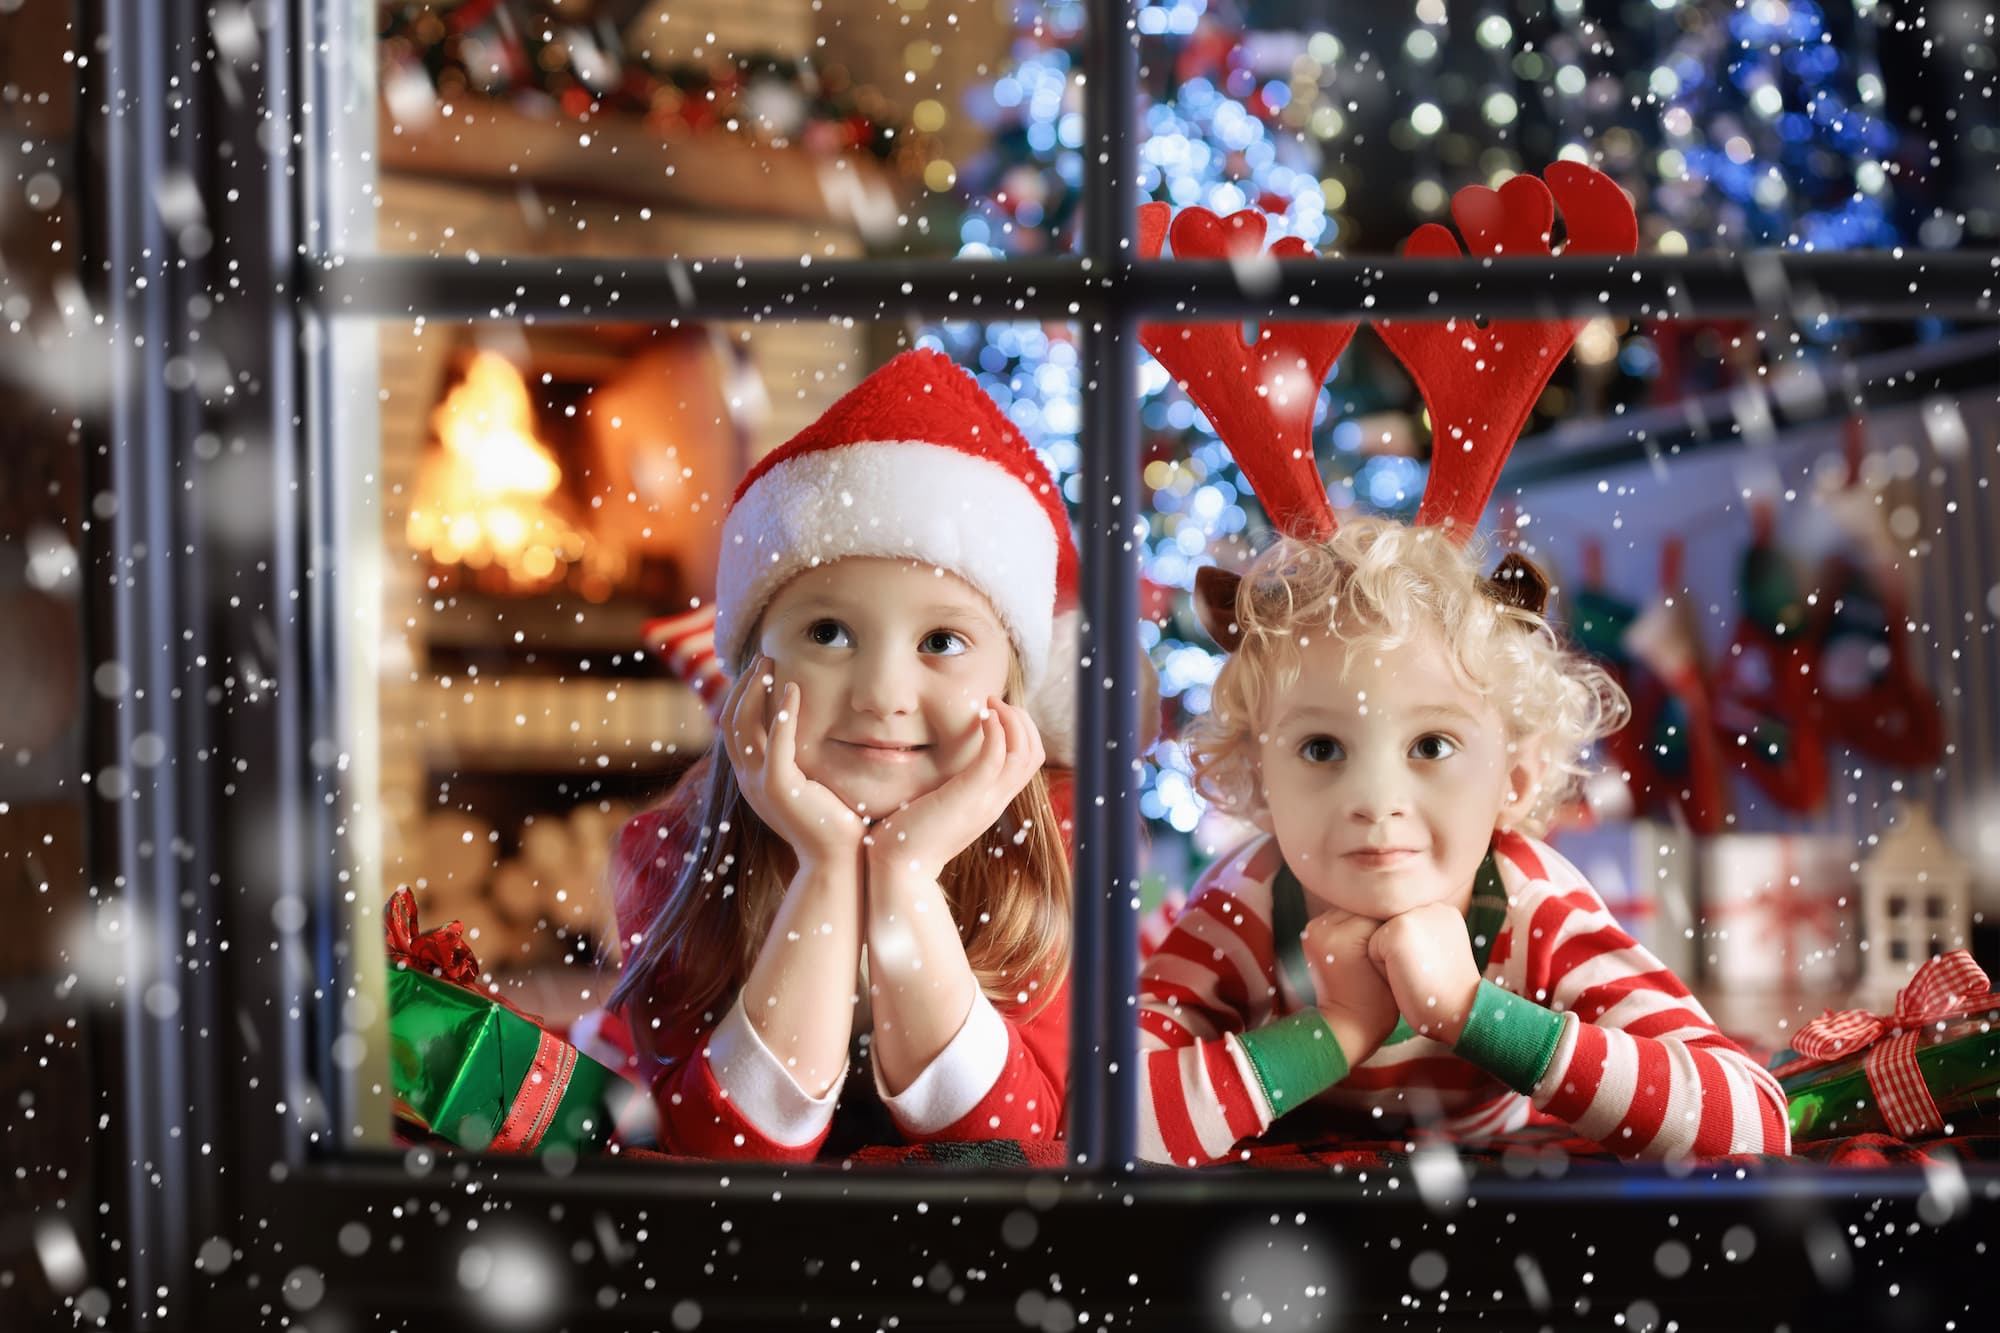 Two children wearing Santa hats smile while looking though a paned glass window on a snowy day.